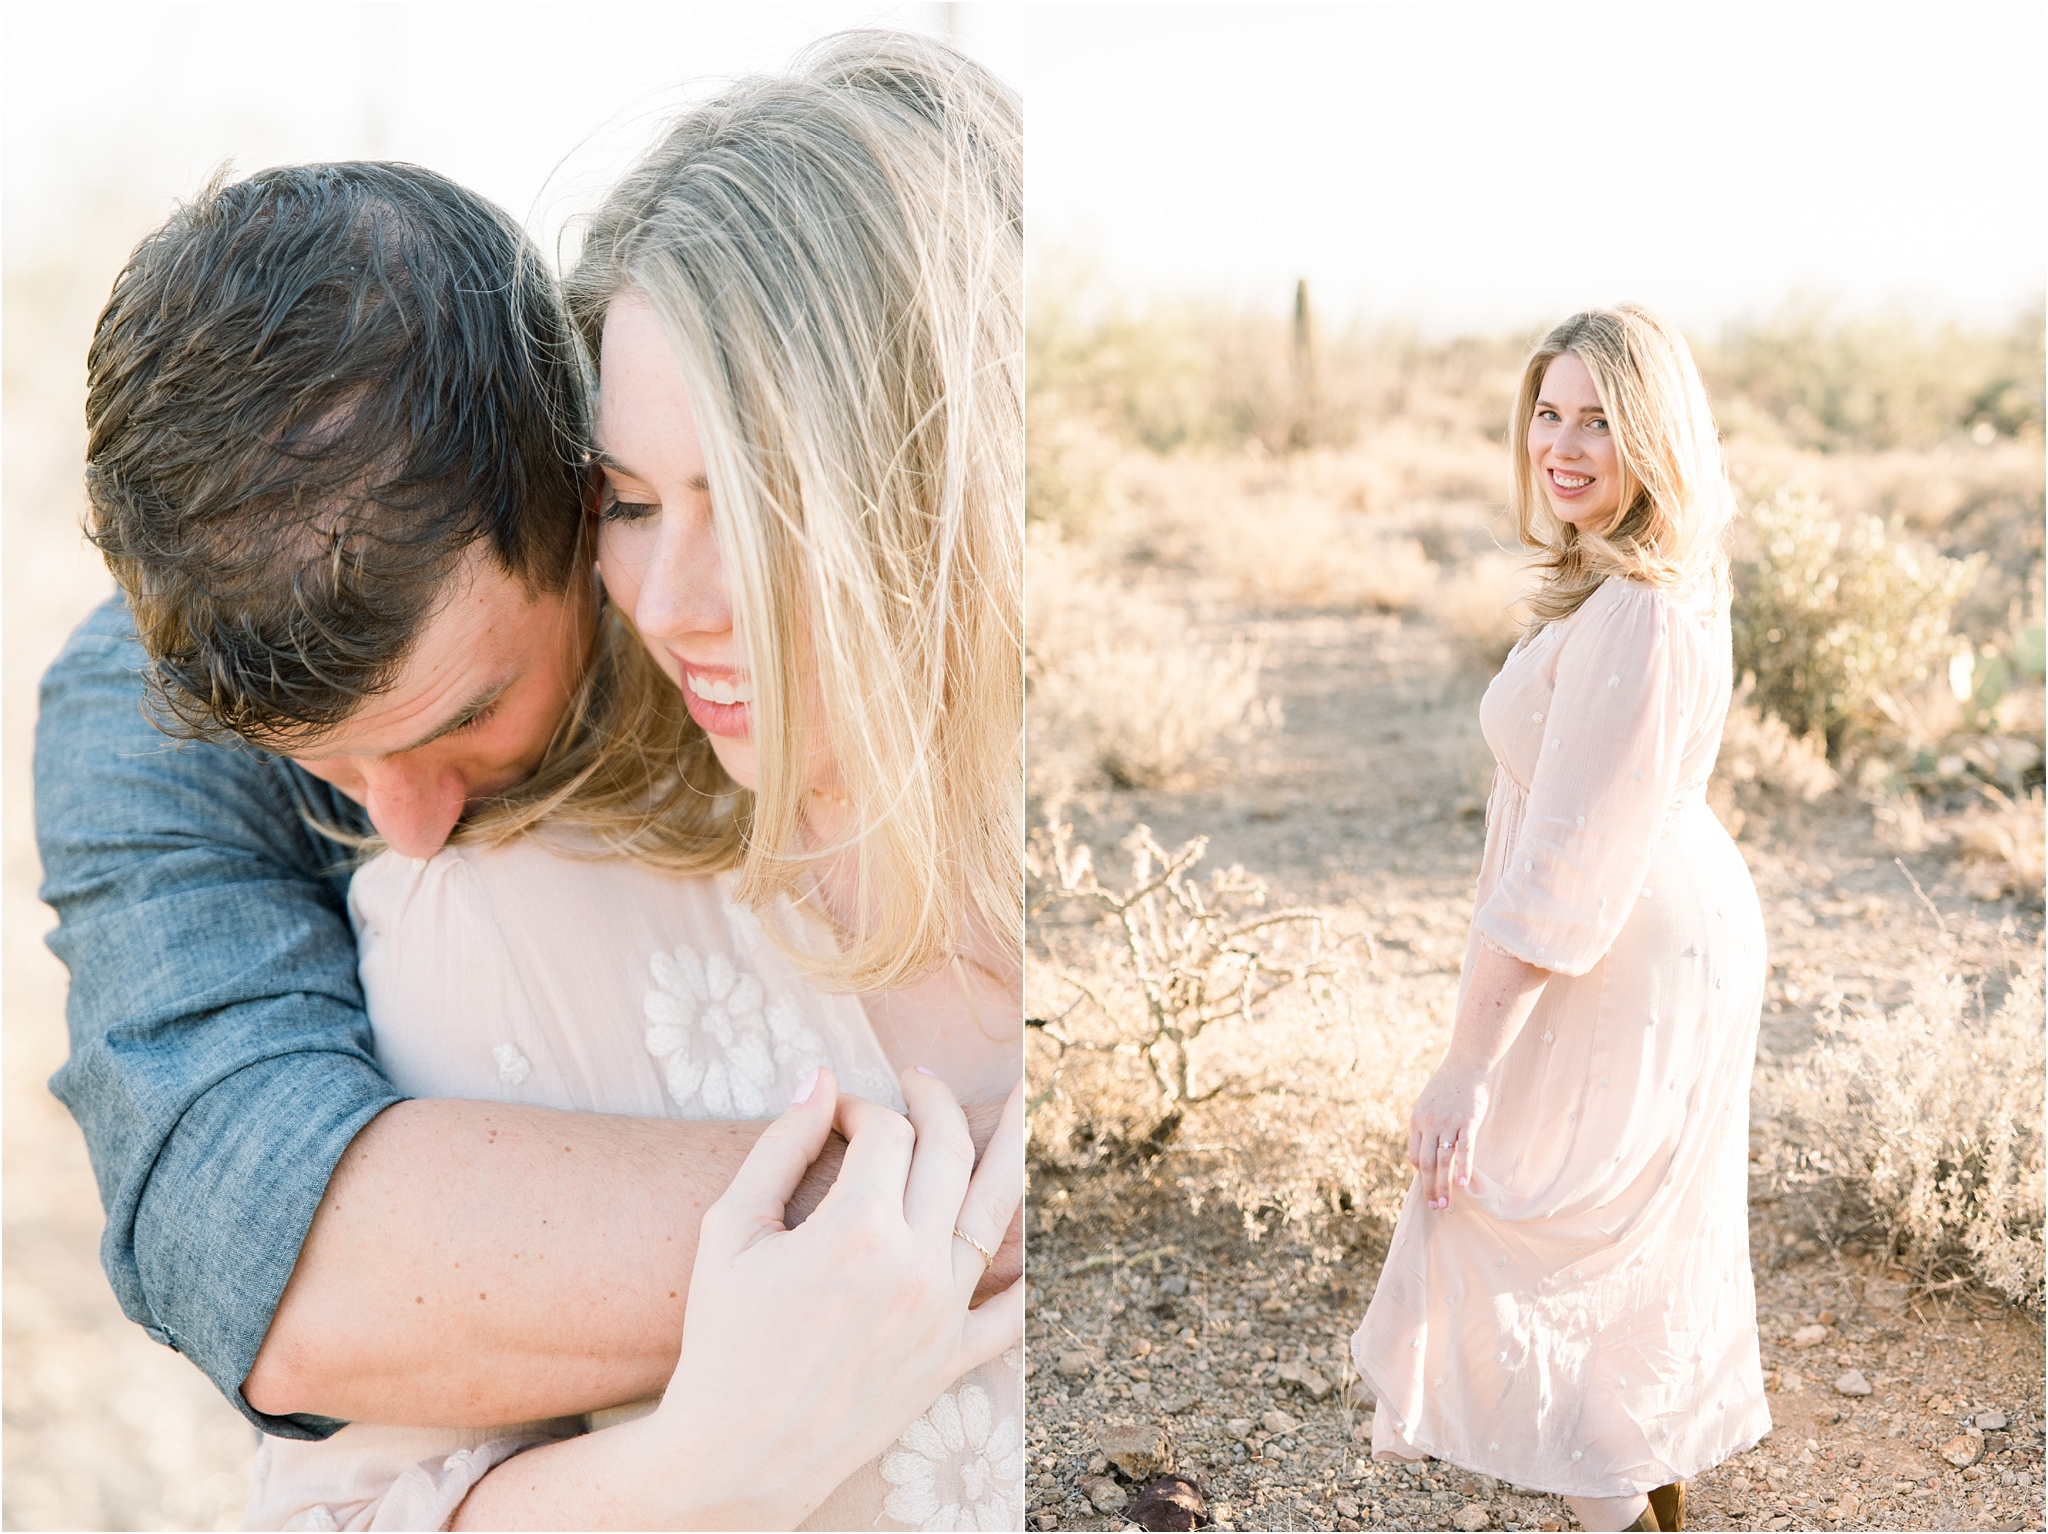 Gates Pass desert engagement session by Tucson Wedding Photographer Anne and Bryan